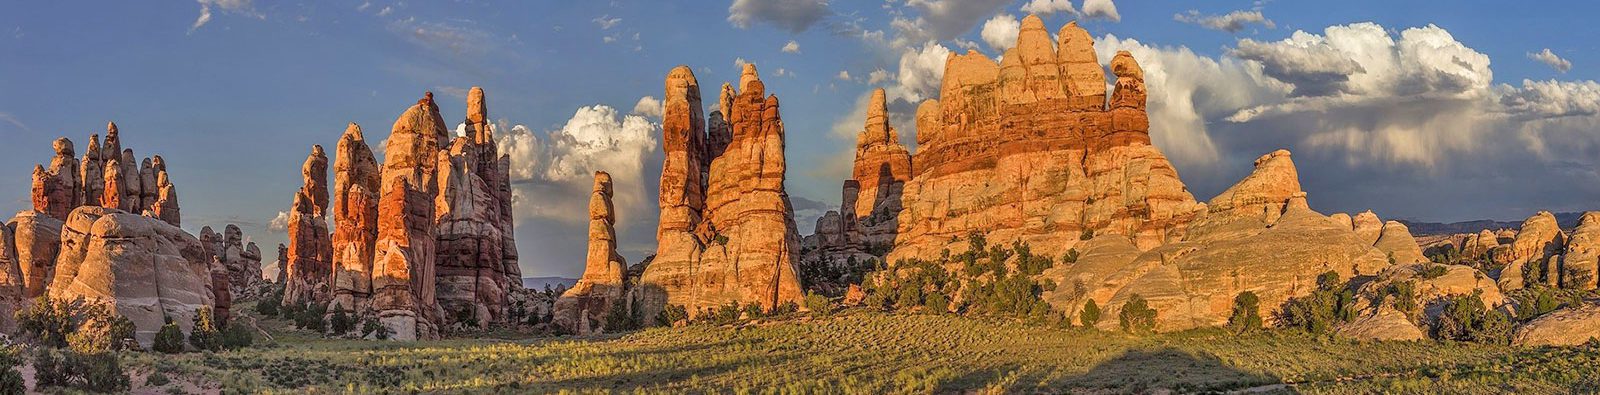 Beautiful spires in Canyonlands National Park